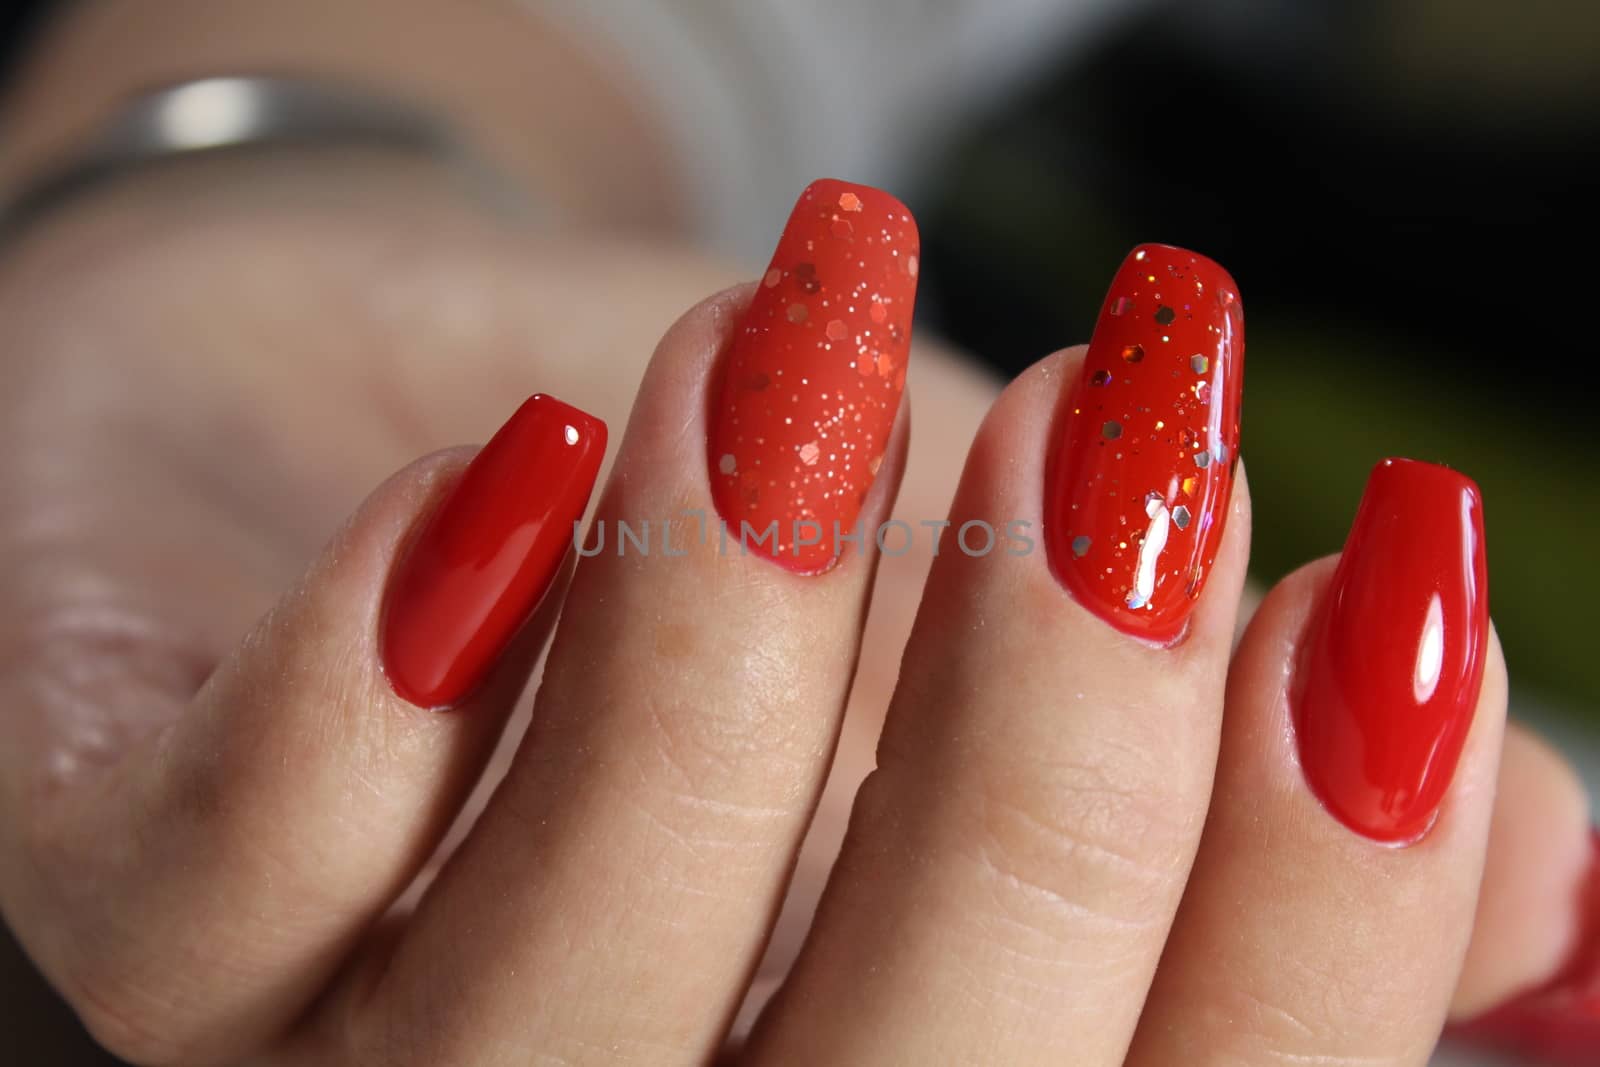 Youth manicure design red color by SmirMaxStock